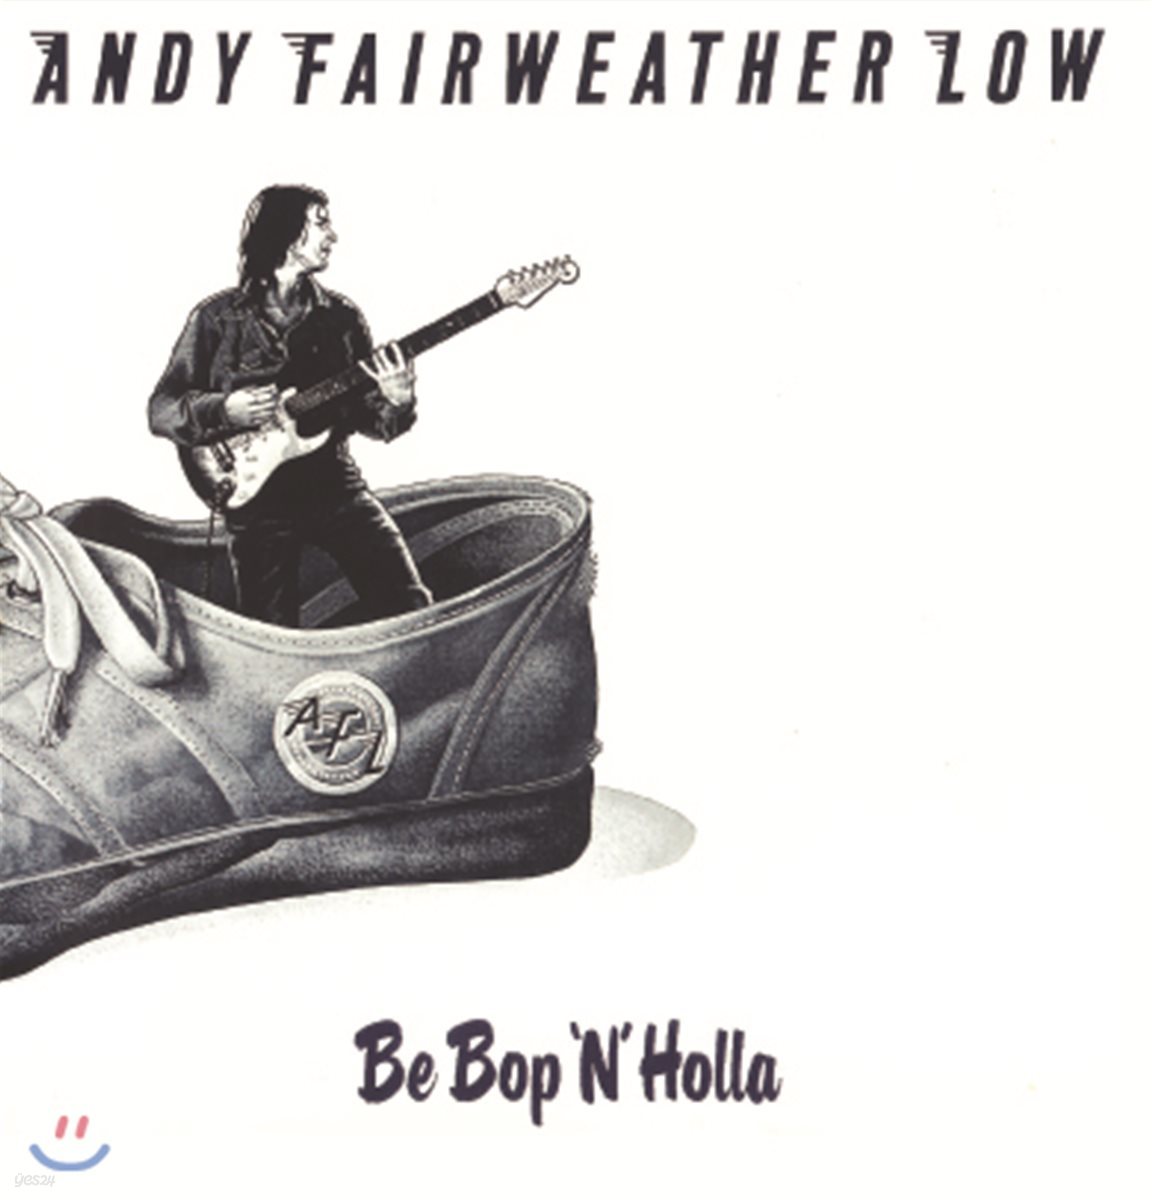 Andy Fairweather Low (앤디 페어웨더 로우) - Be Bop 'N' Holla